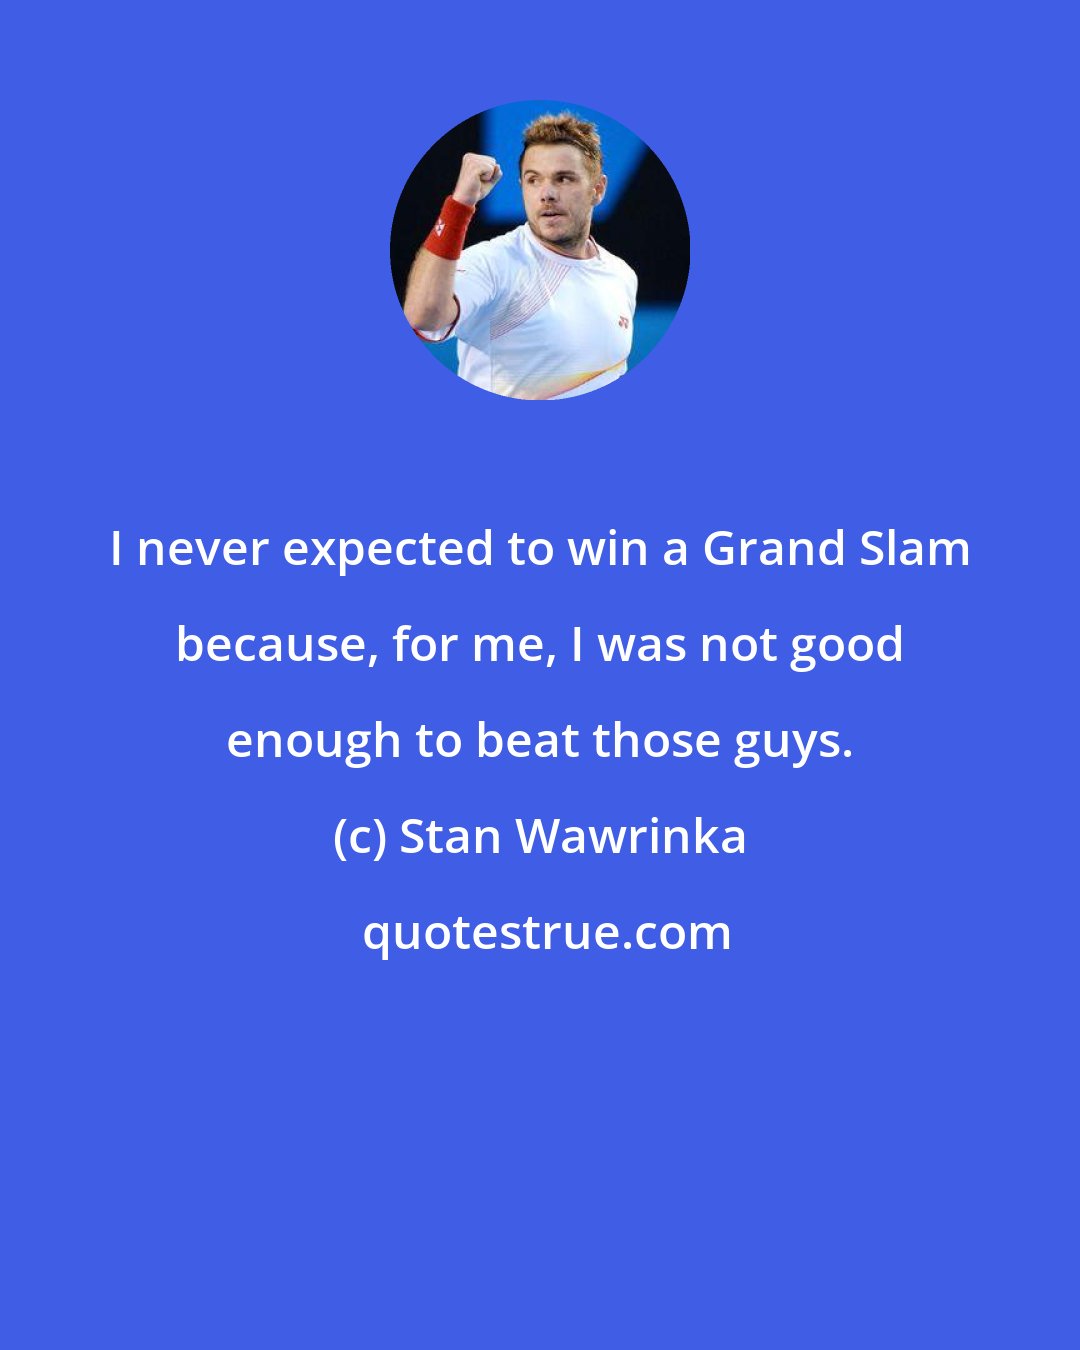 Stan Wawrinka: I never expected to win a Grand Slam because, for me, I was not good enough to beat those guys.